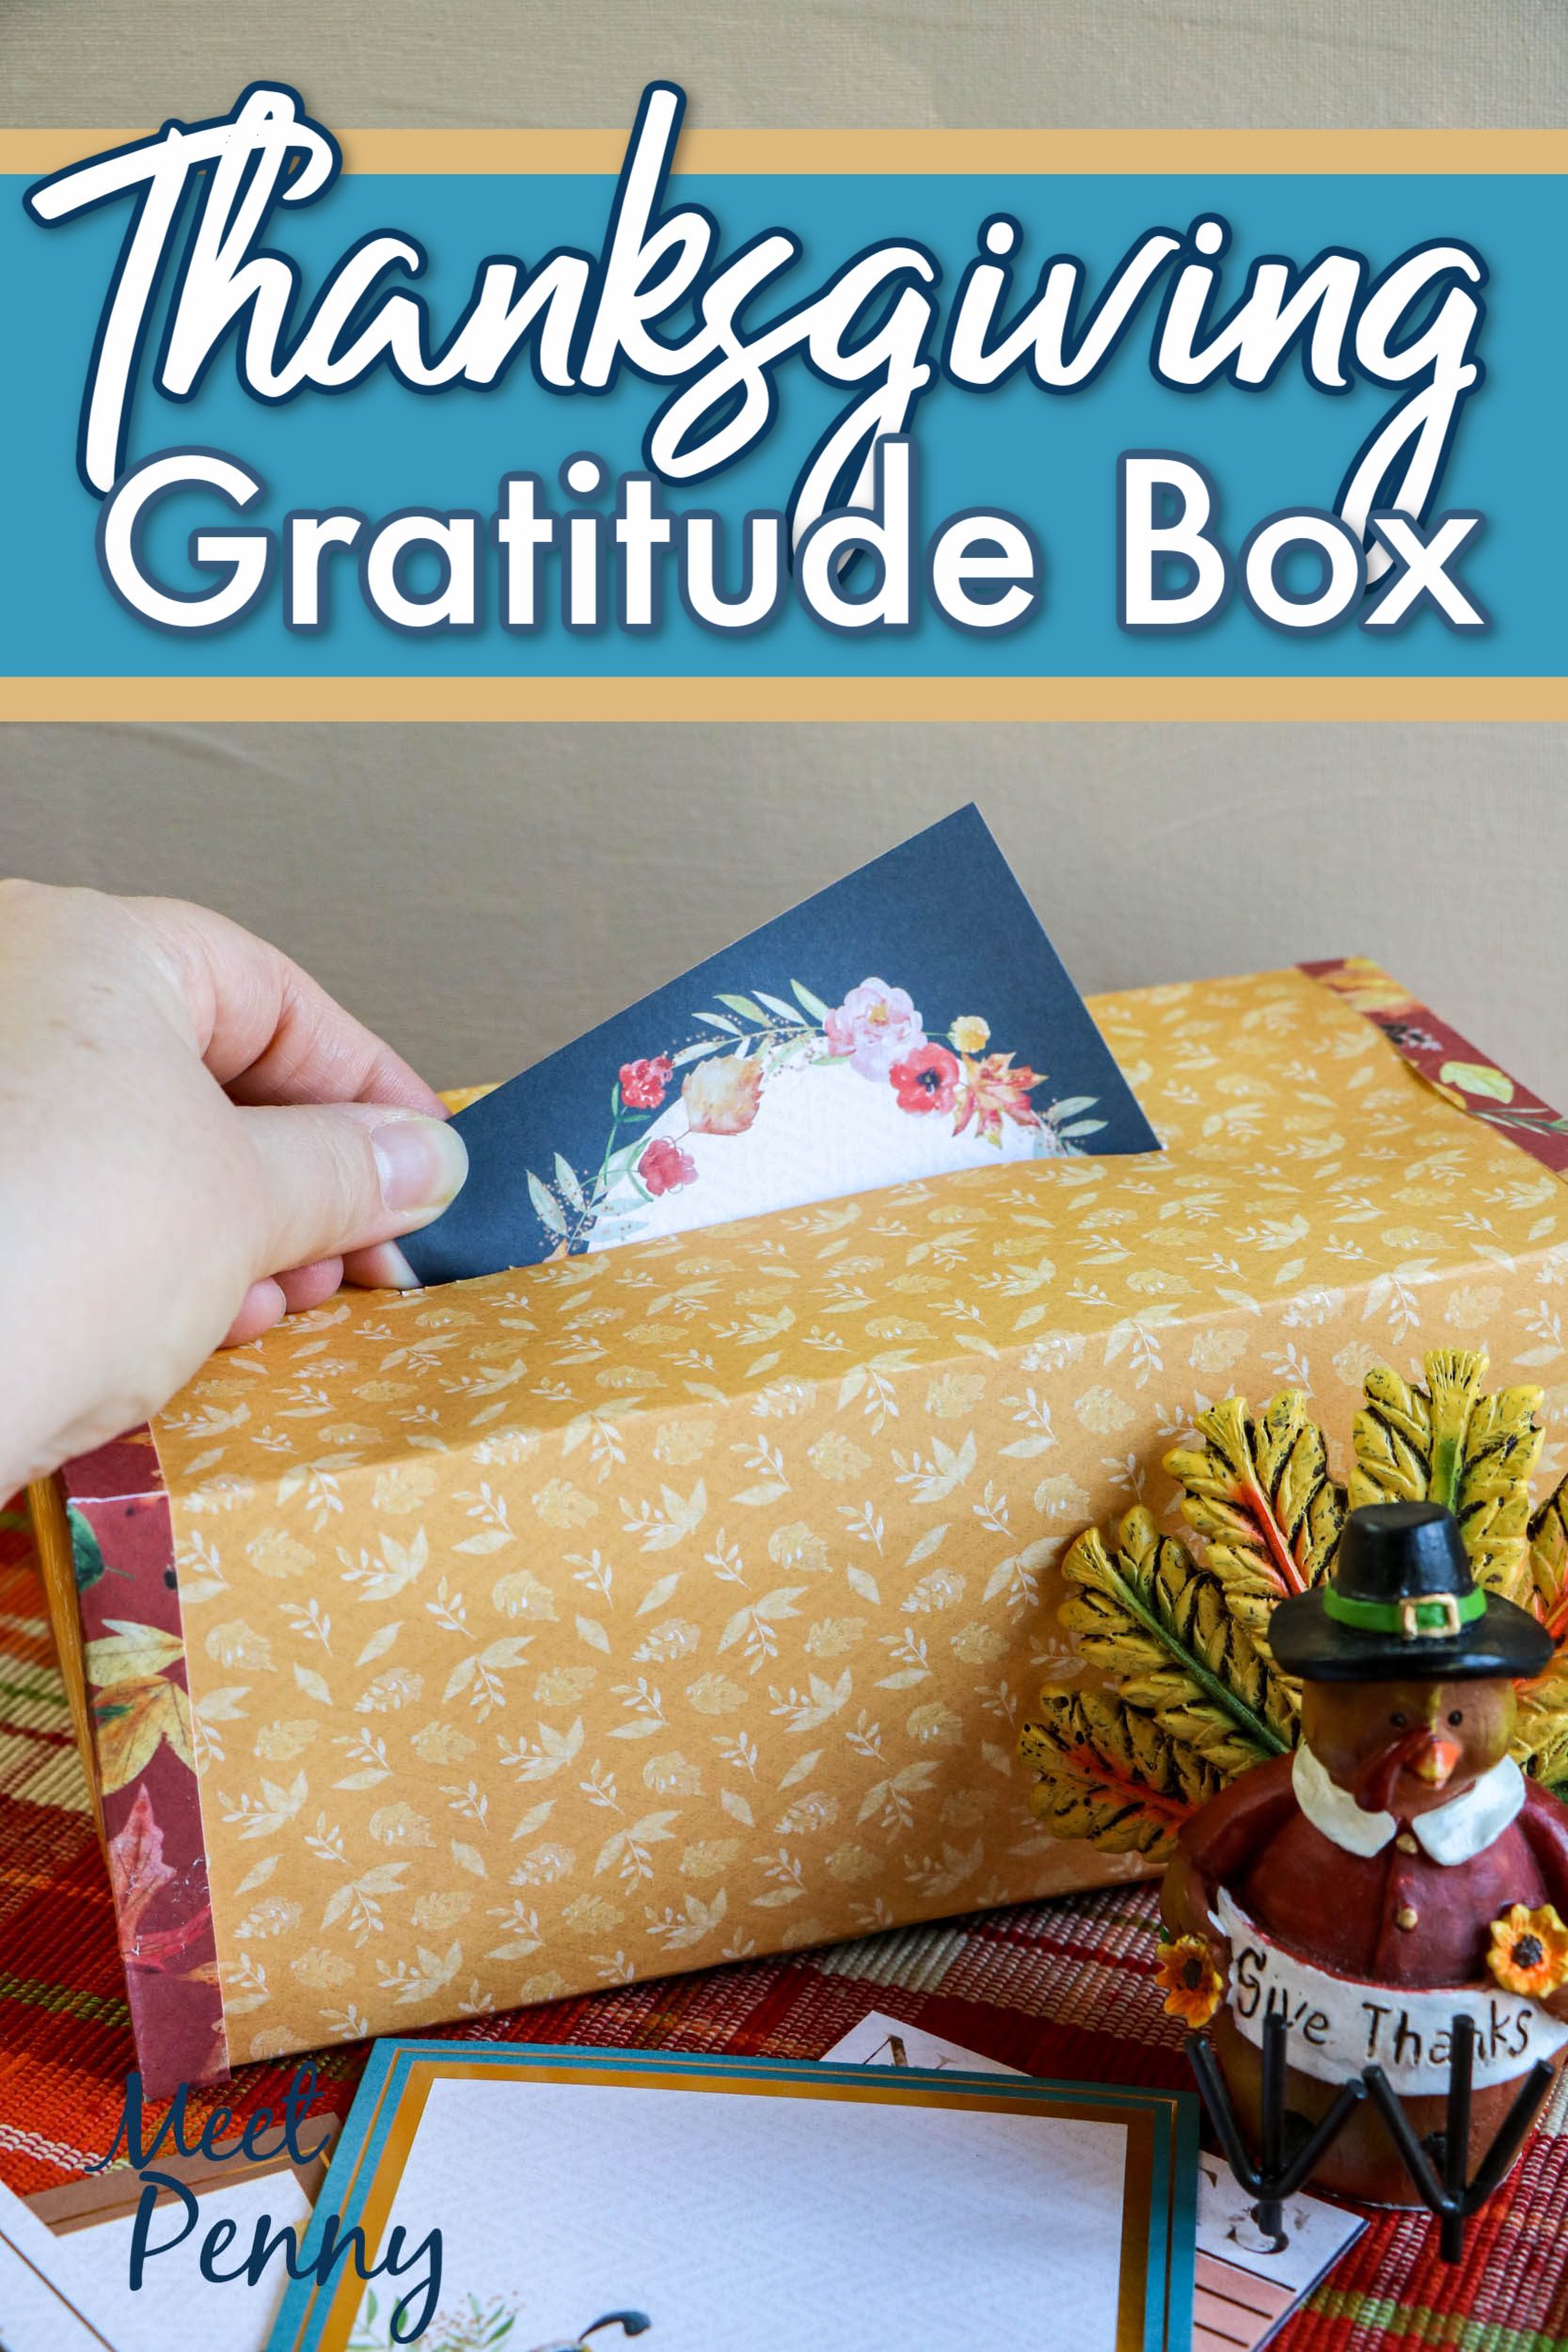 Using a Thanksgiving Gratitude Box to help teach children about being thankful.